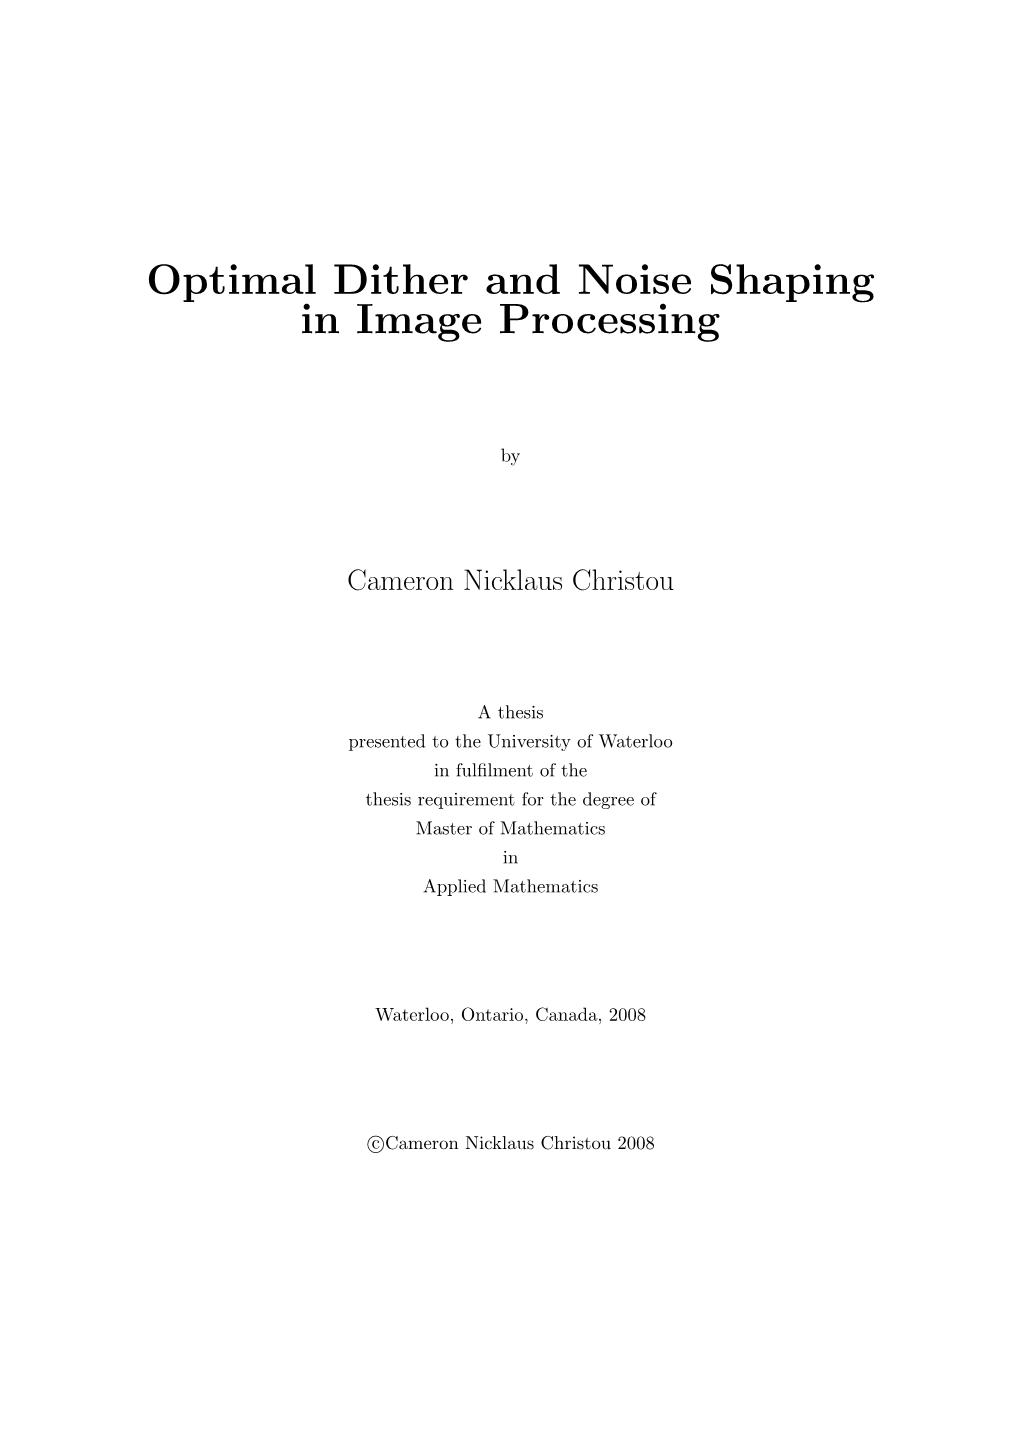 Optimal Dither and Noise Shaping in Image Processing